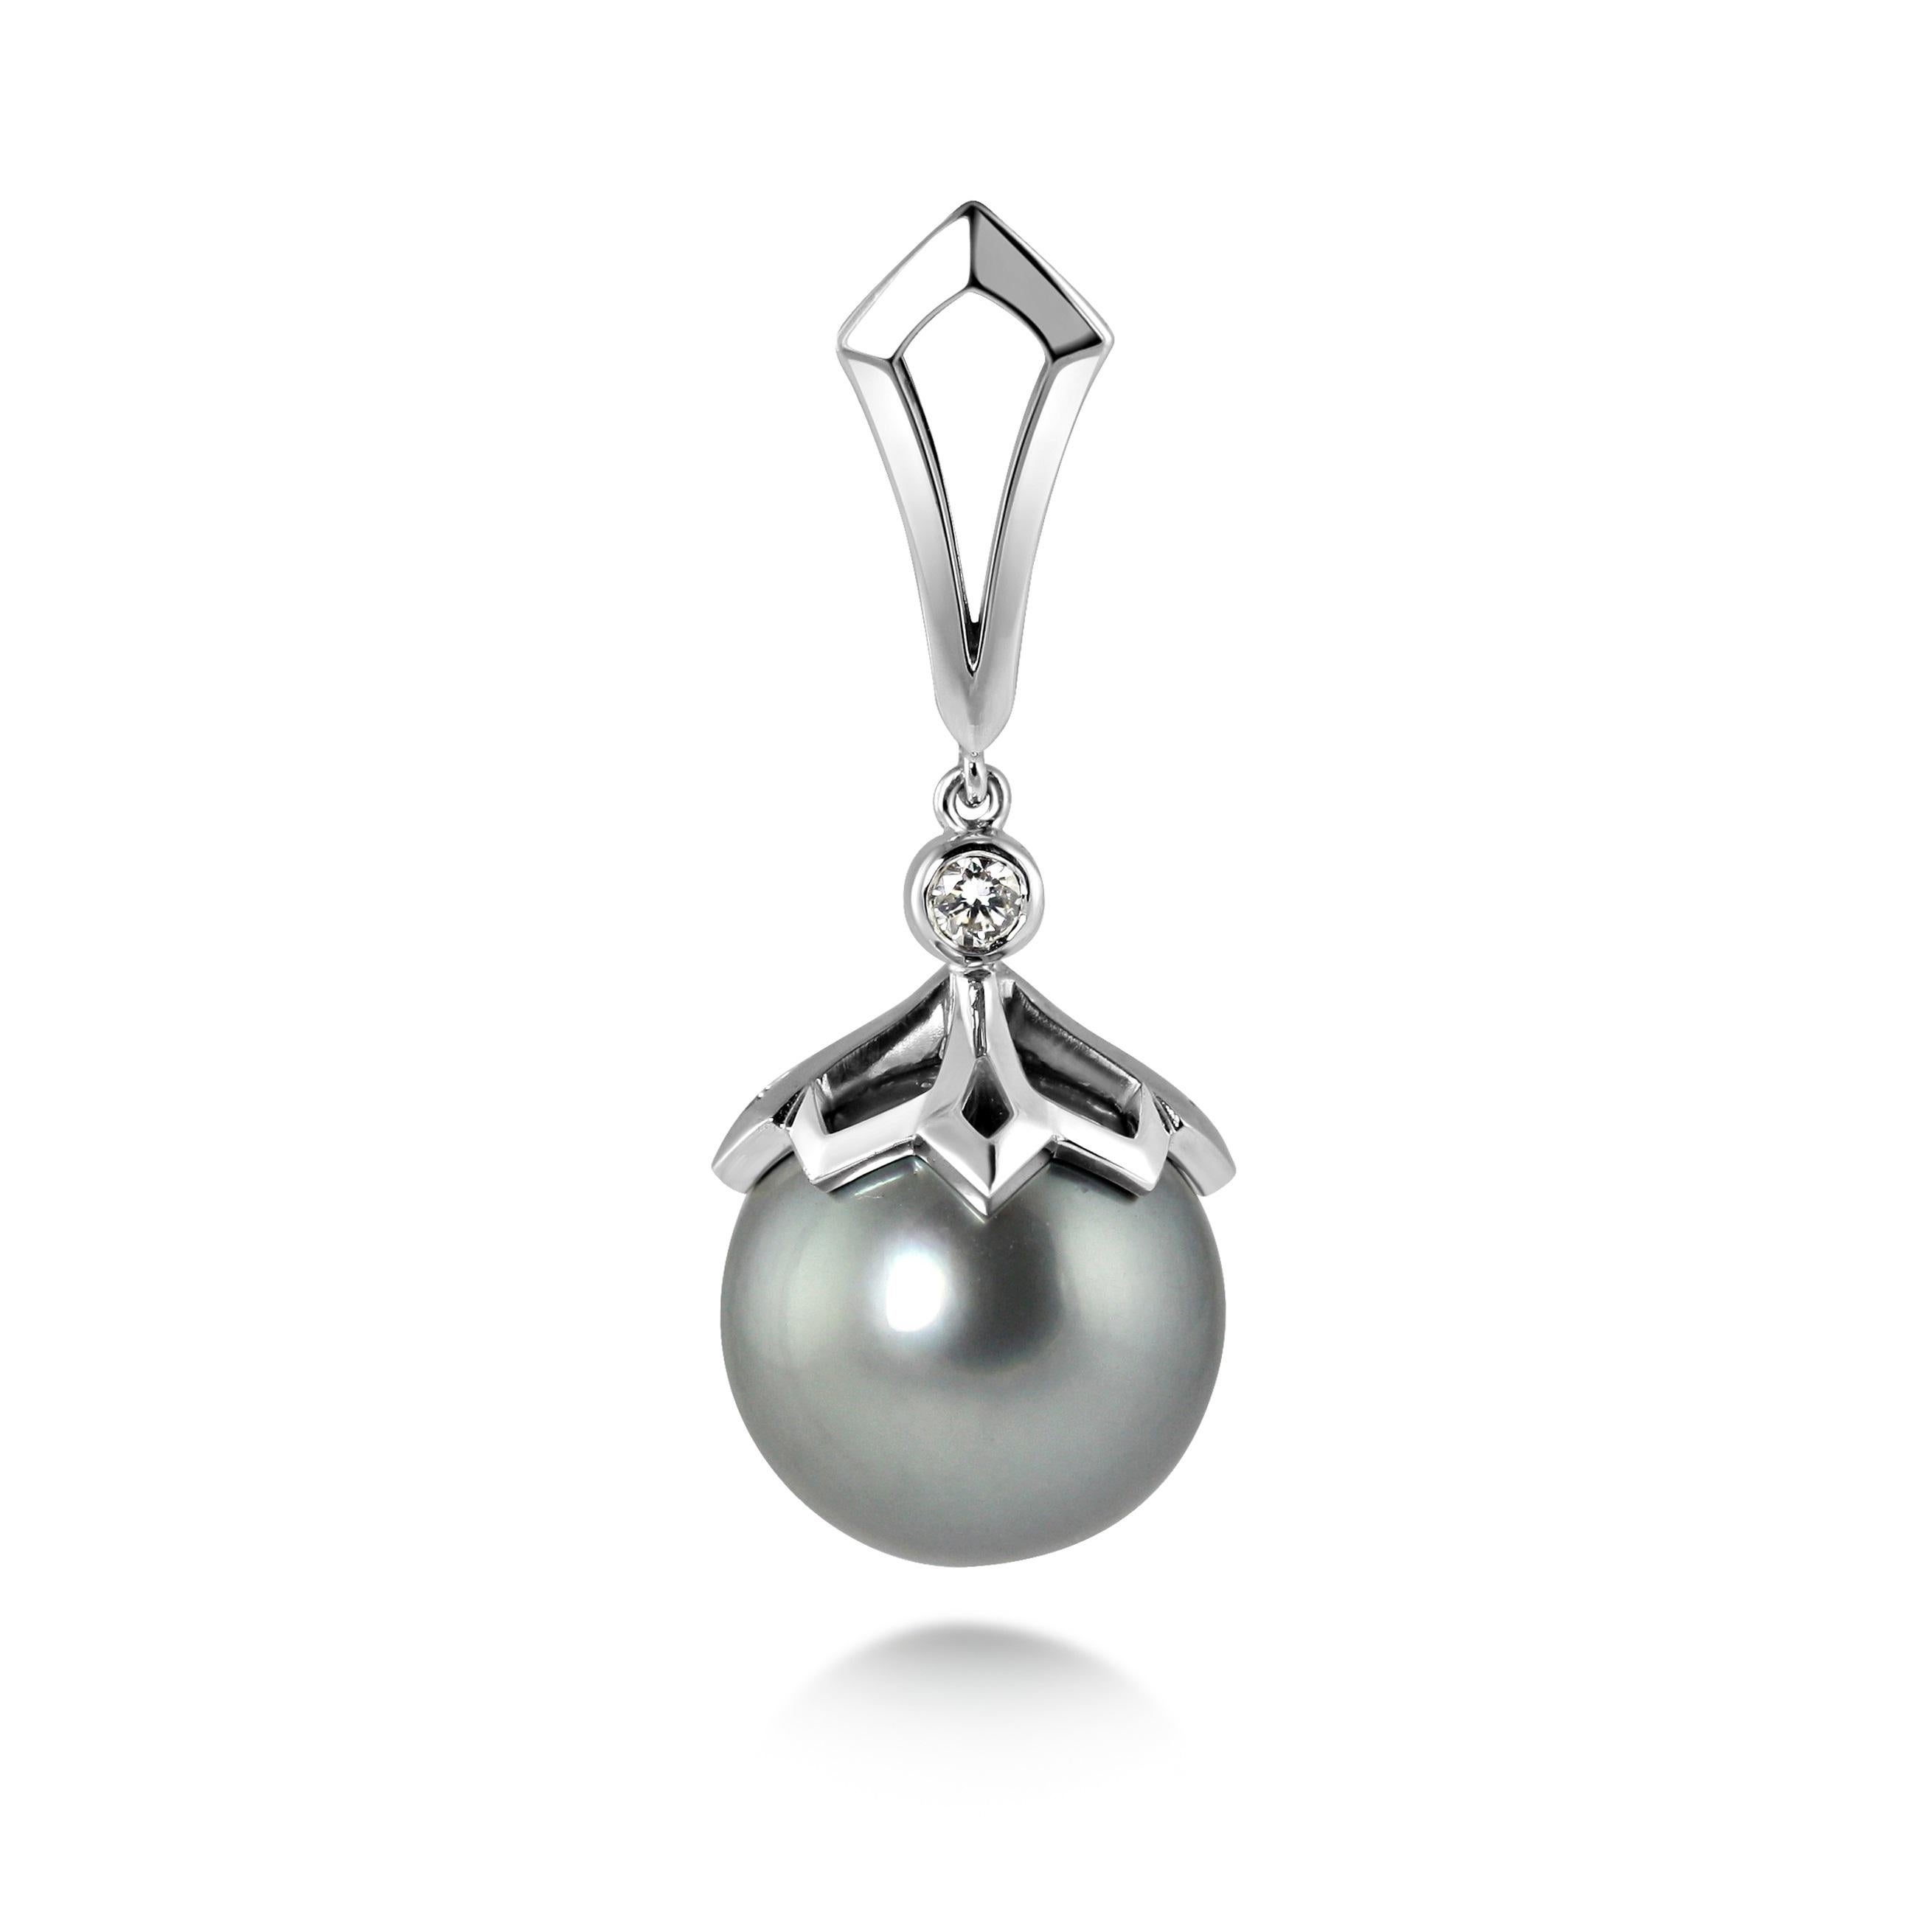 These stunning natural grey Tahitian Pearls are held in a beautifully pierced cap with a diamond top. 

The earrings are articulated above the diamond, allowing them movement when worn. 

A matching pendant and ring are available, please see our